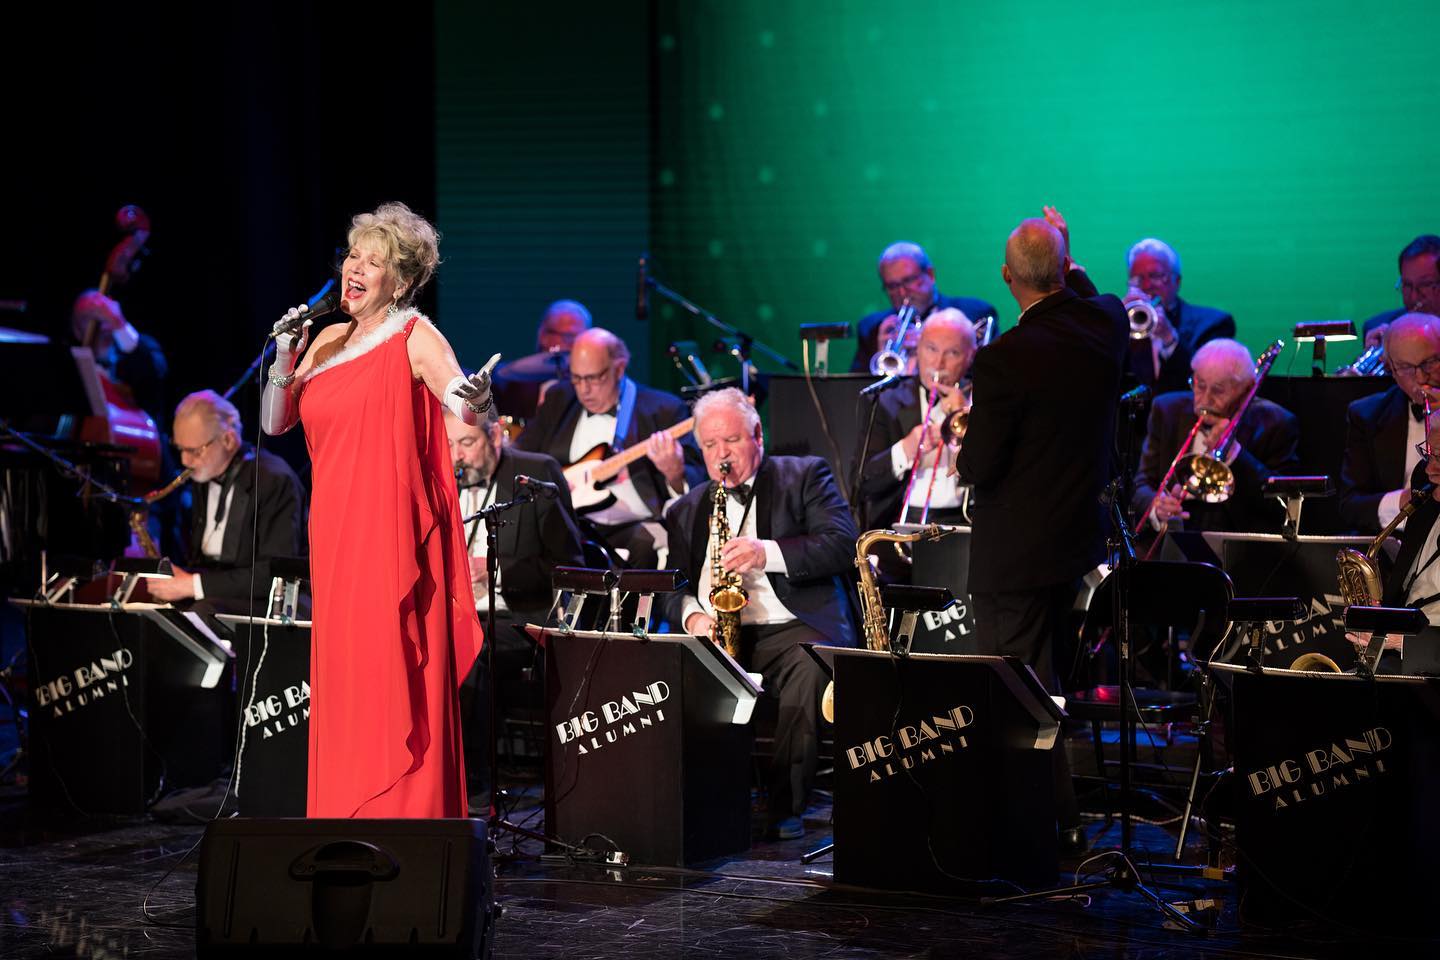 From the Big Band Holiday show.